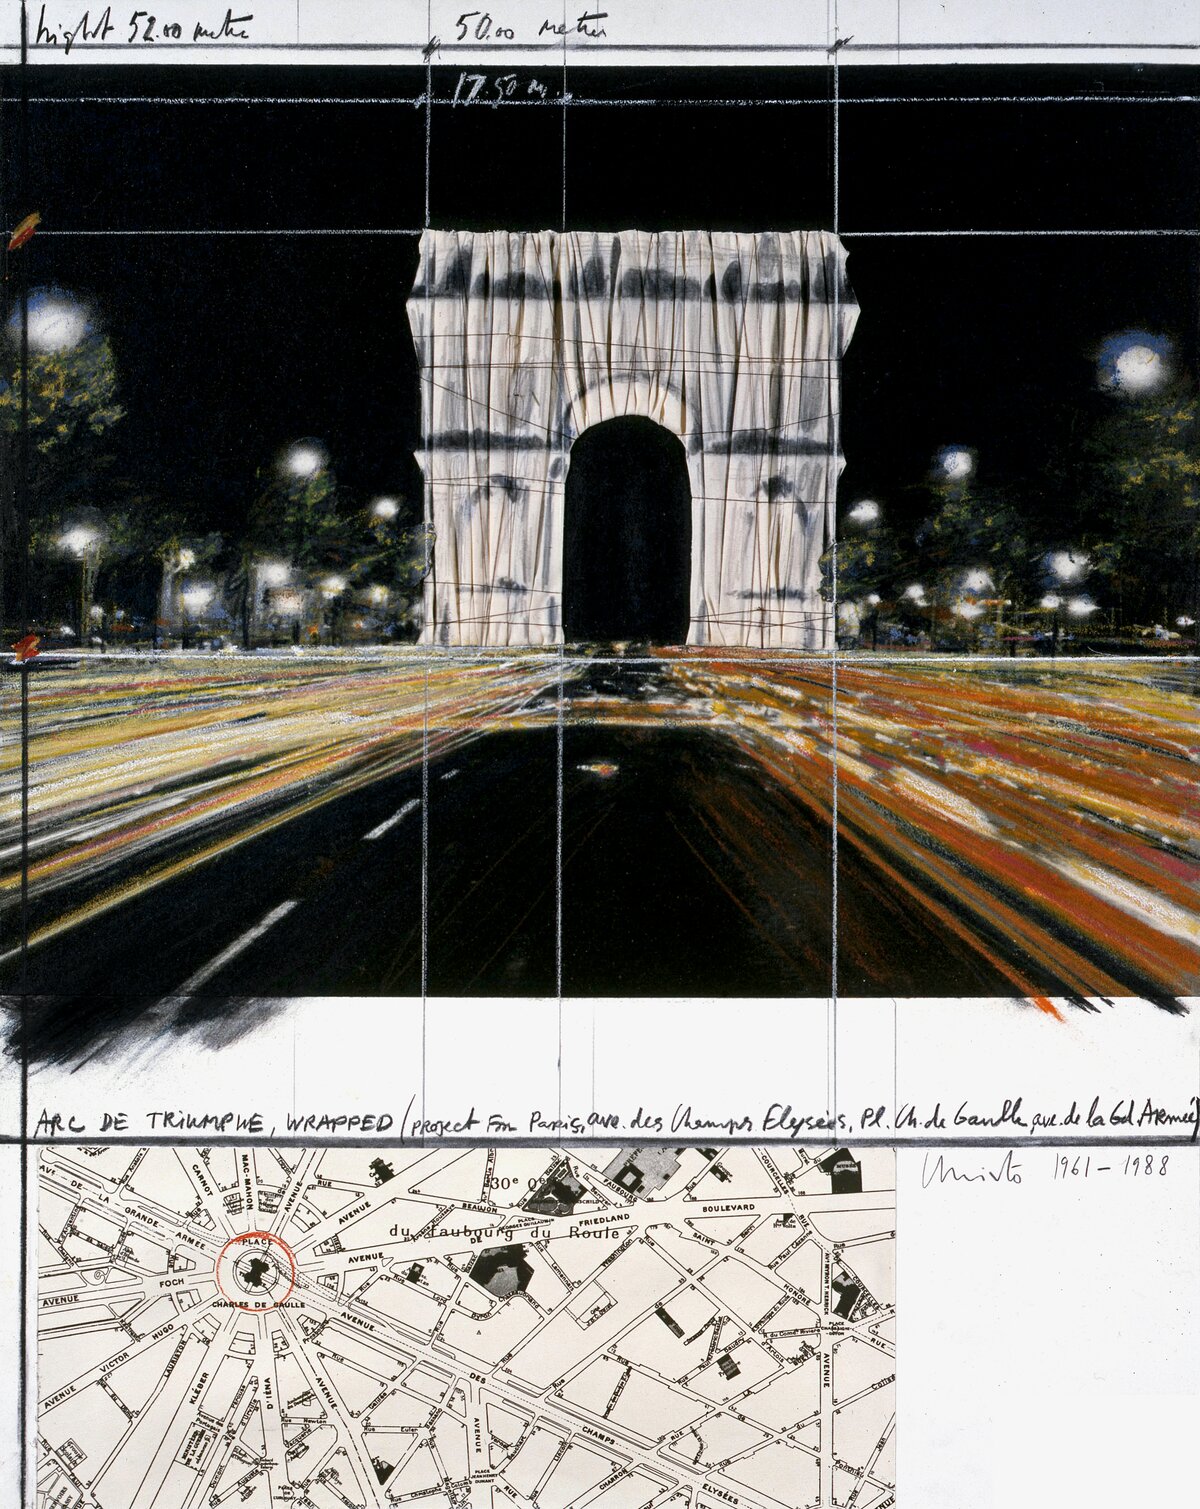 Christo, Arc de Triumphe, Wrapped_Project for Paris_Collage 1988, Pencil, fabric, twine, pastel, charcoal, wax crayon, map, and Photostat, 71 x 56 cm_28 x 22“_Private collection ...